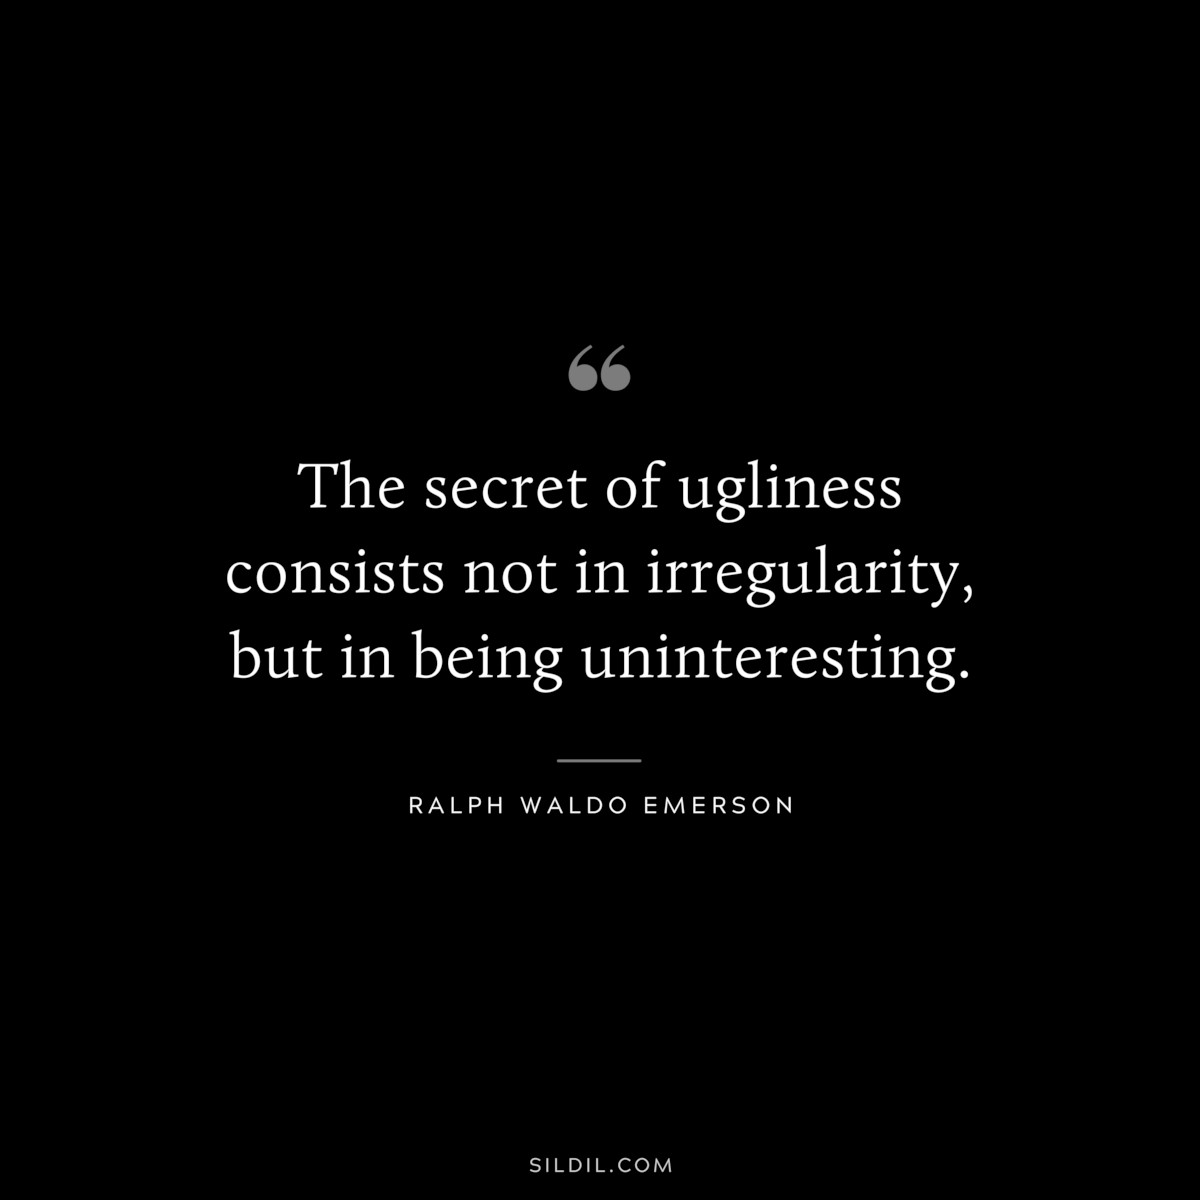 The secret of ugliness consists not in irregularity, but in being uninteresting. — Ralph Waldo Emerson